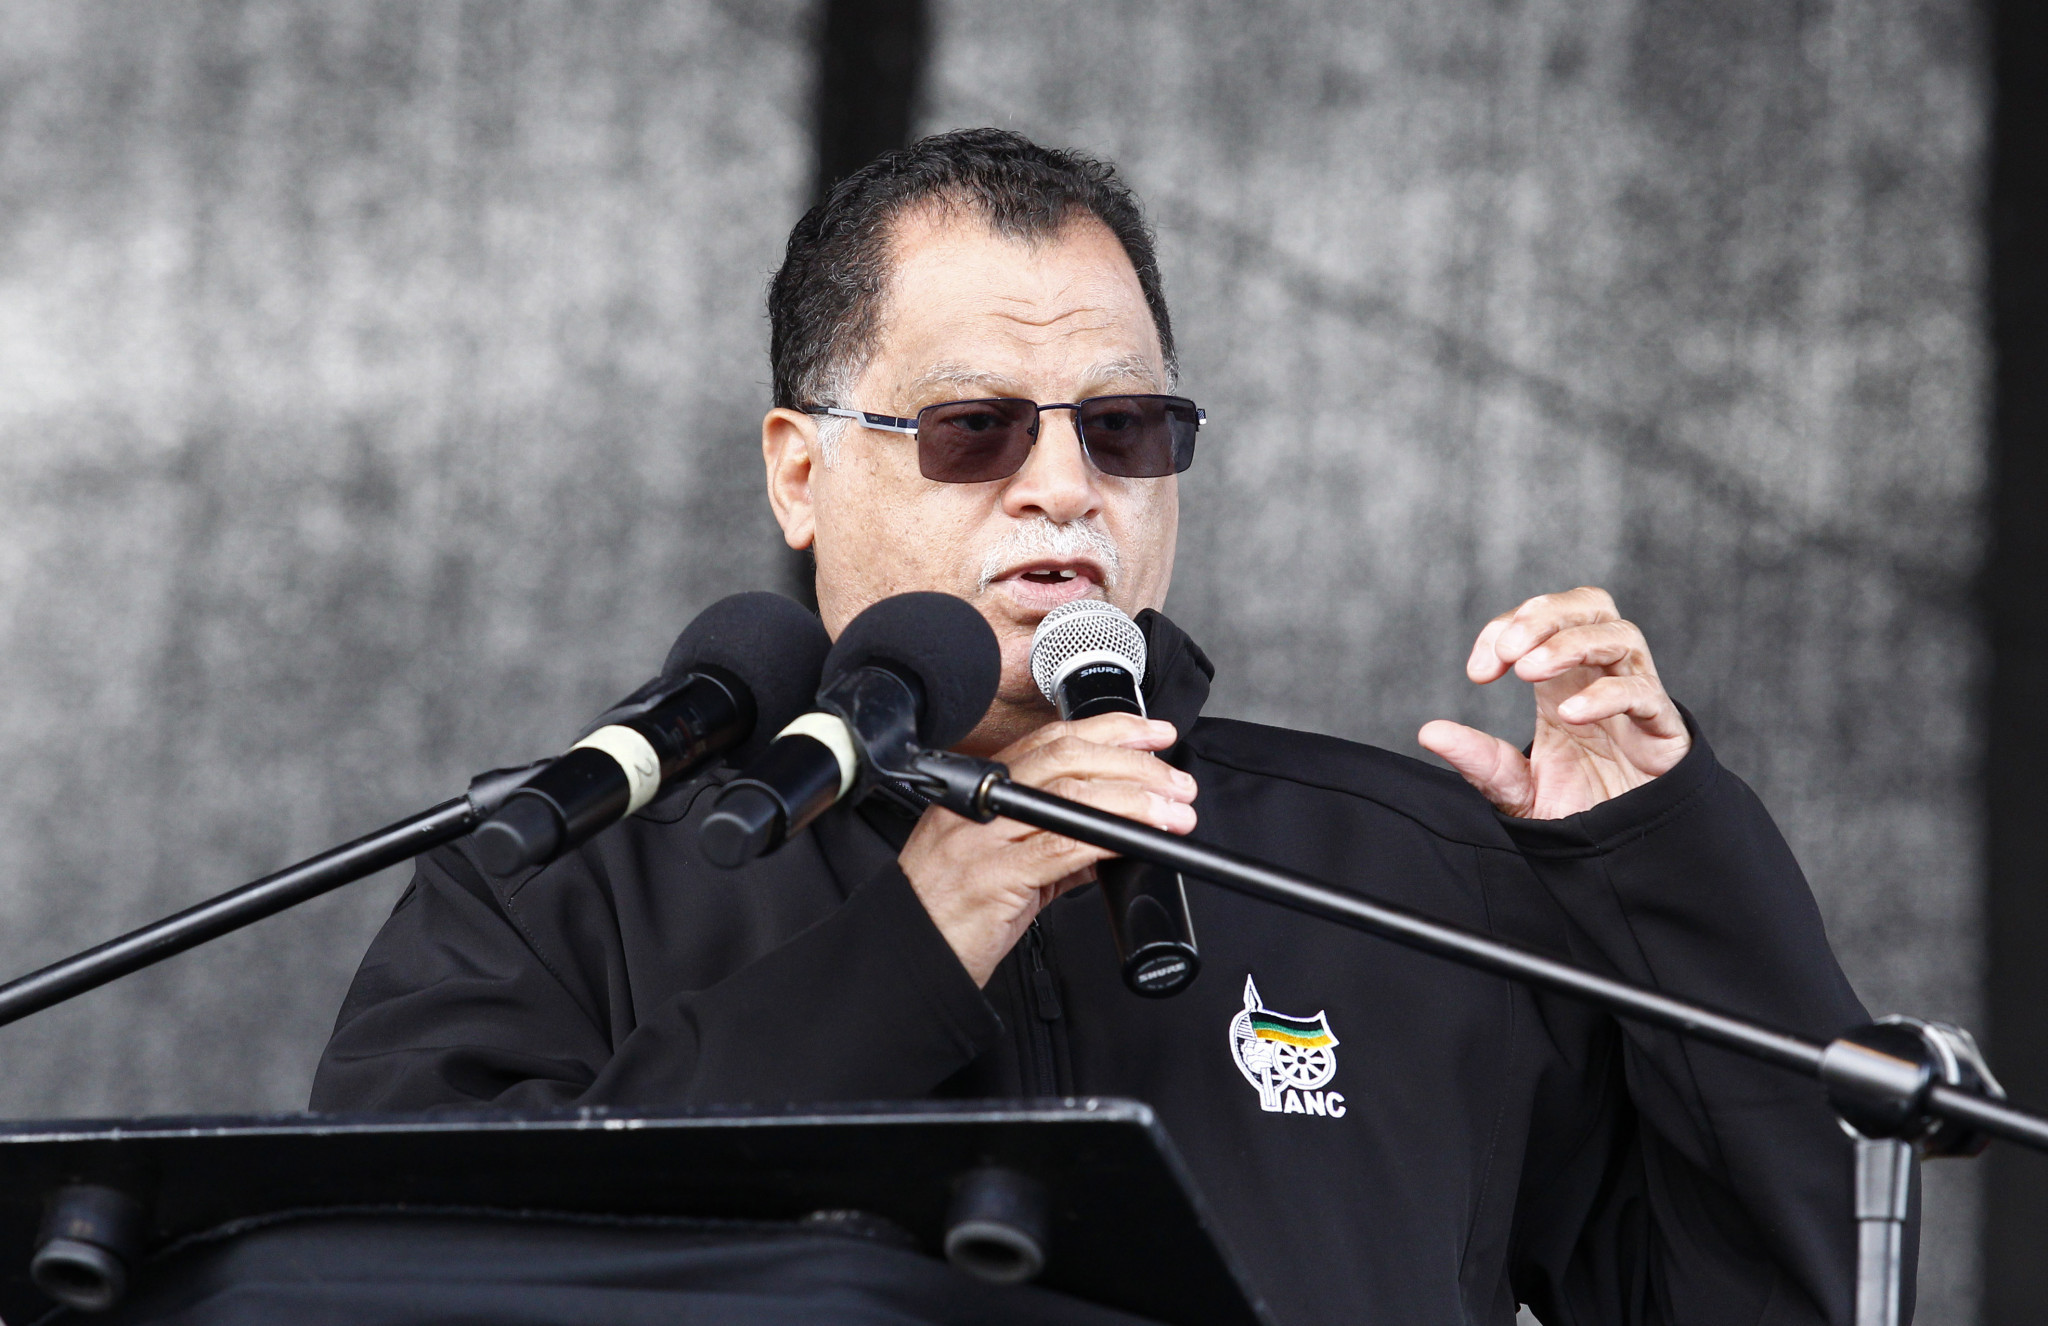 A specialist detective is looking into the case involving Danny Jordaan ©Getty Images